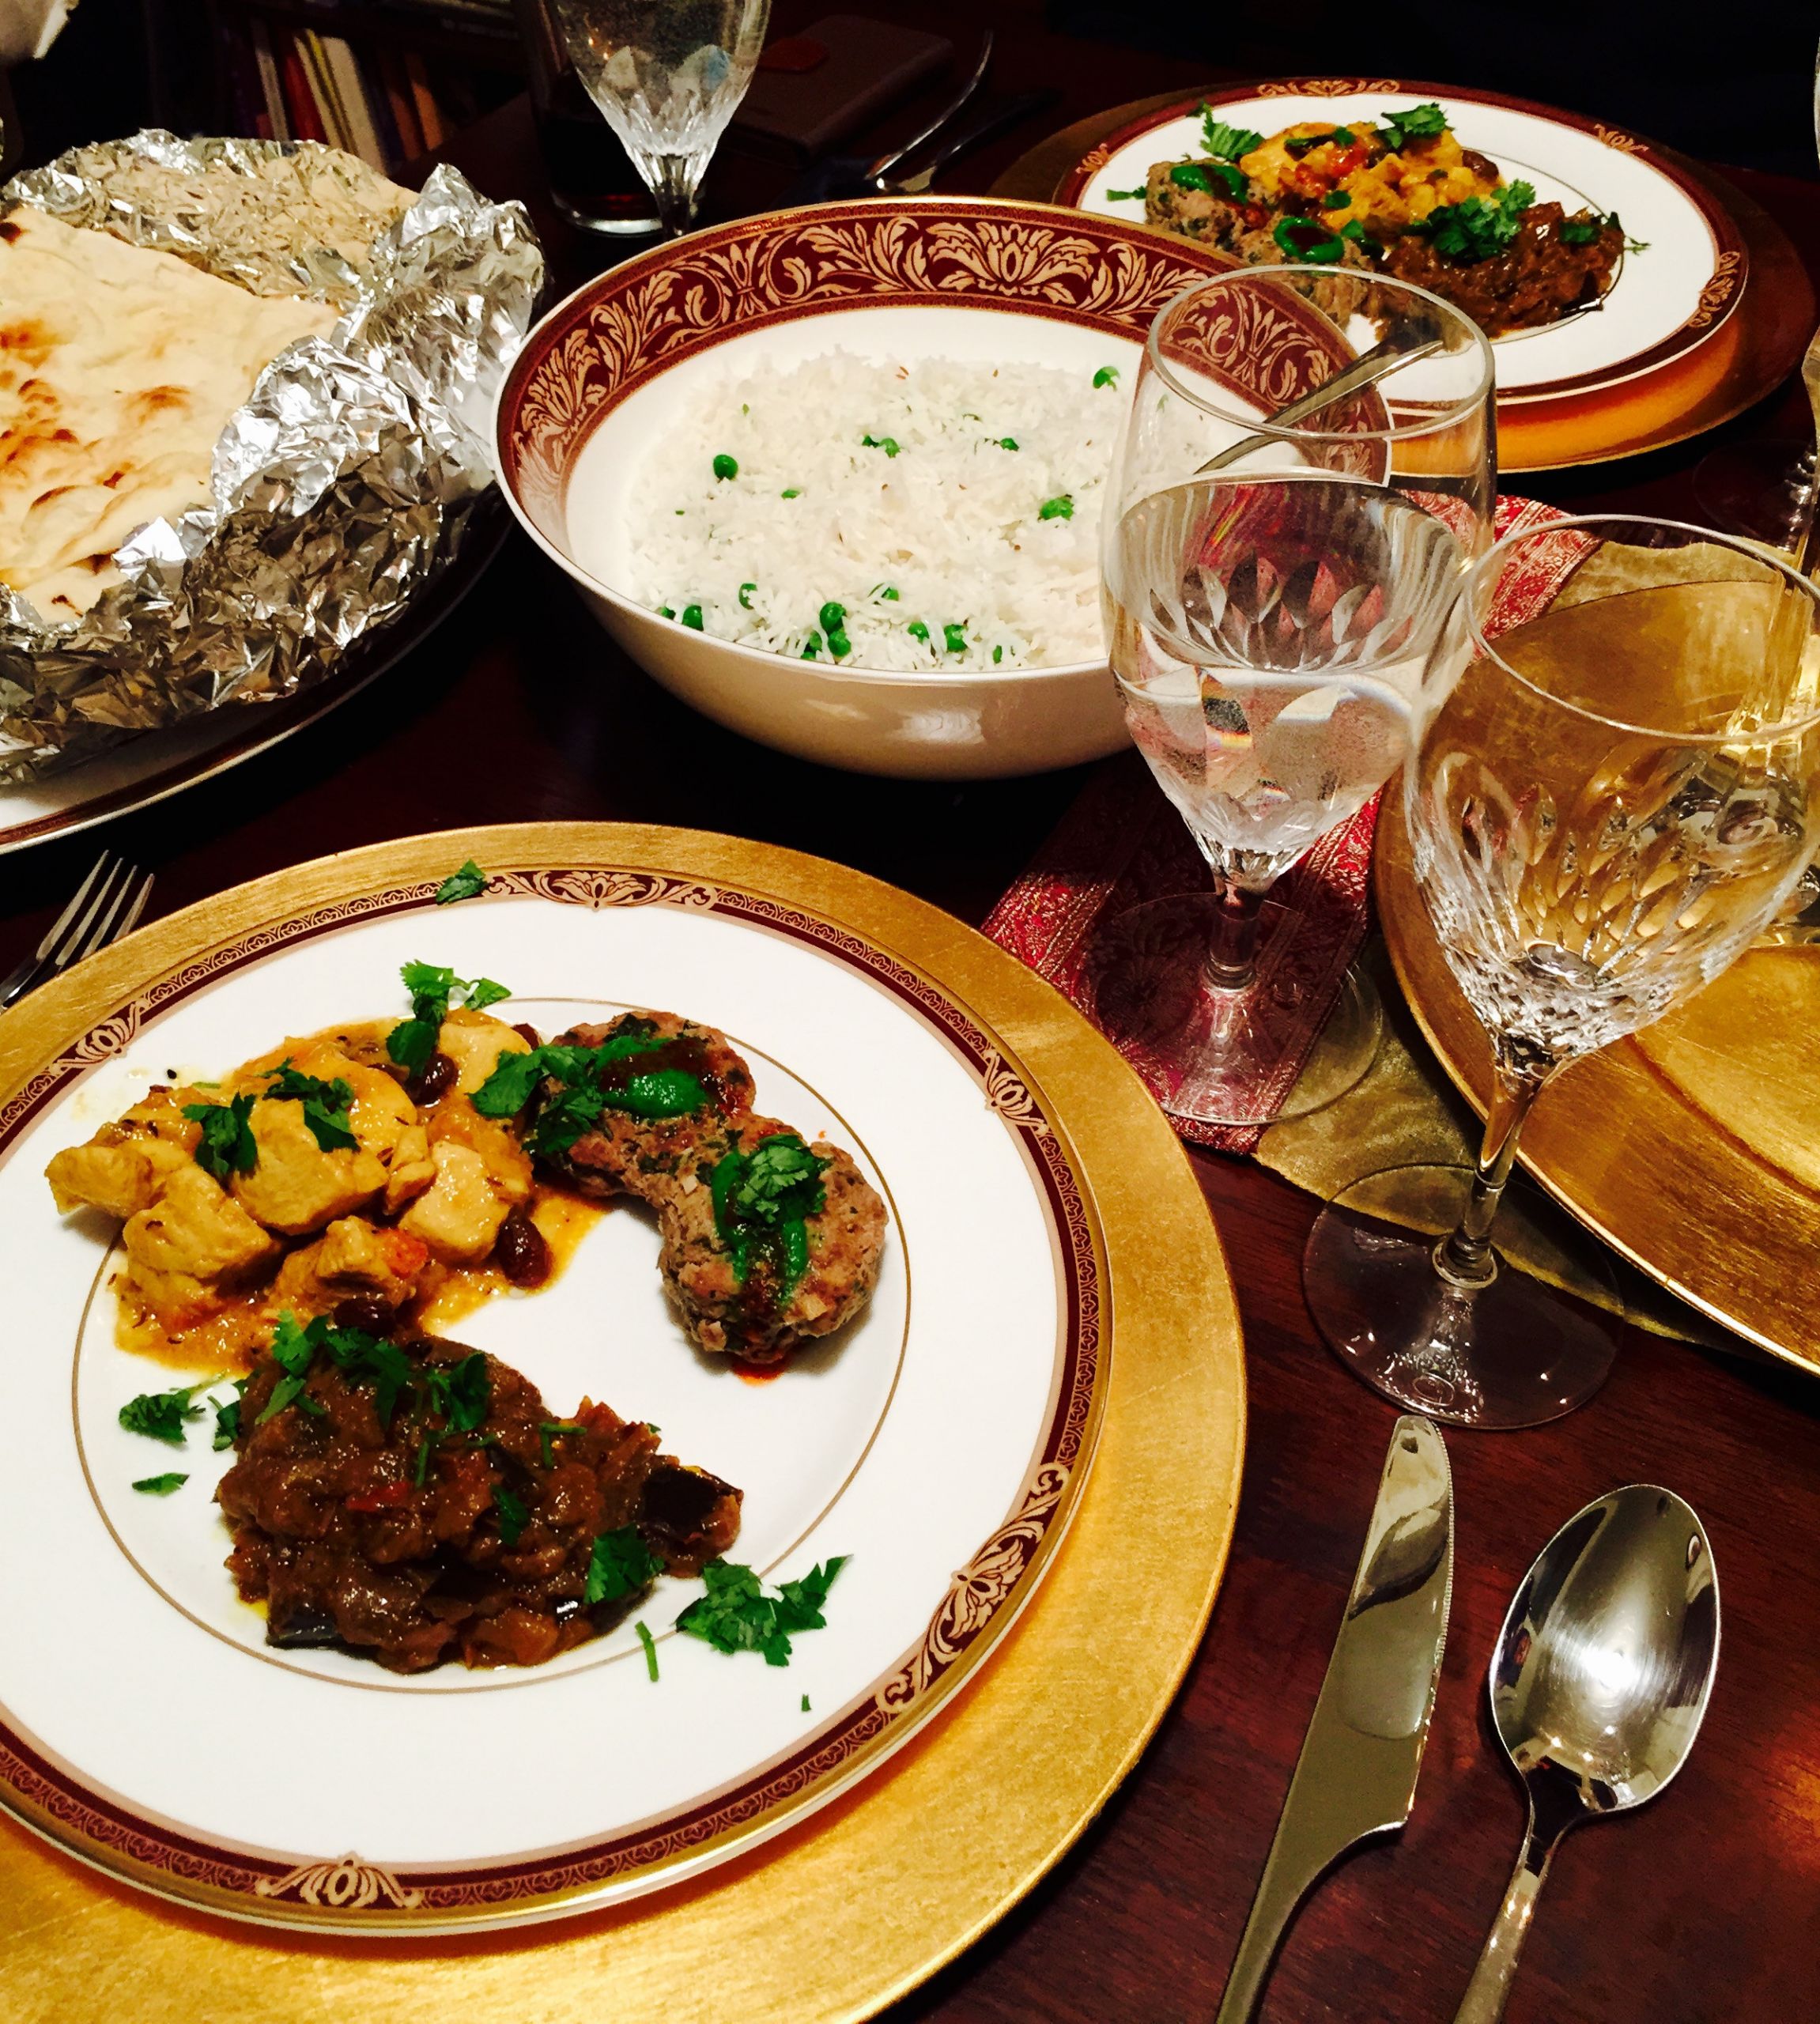 Party Dinner Ideas
 Hosting an Elegant Indian Dinner Party